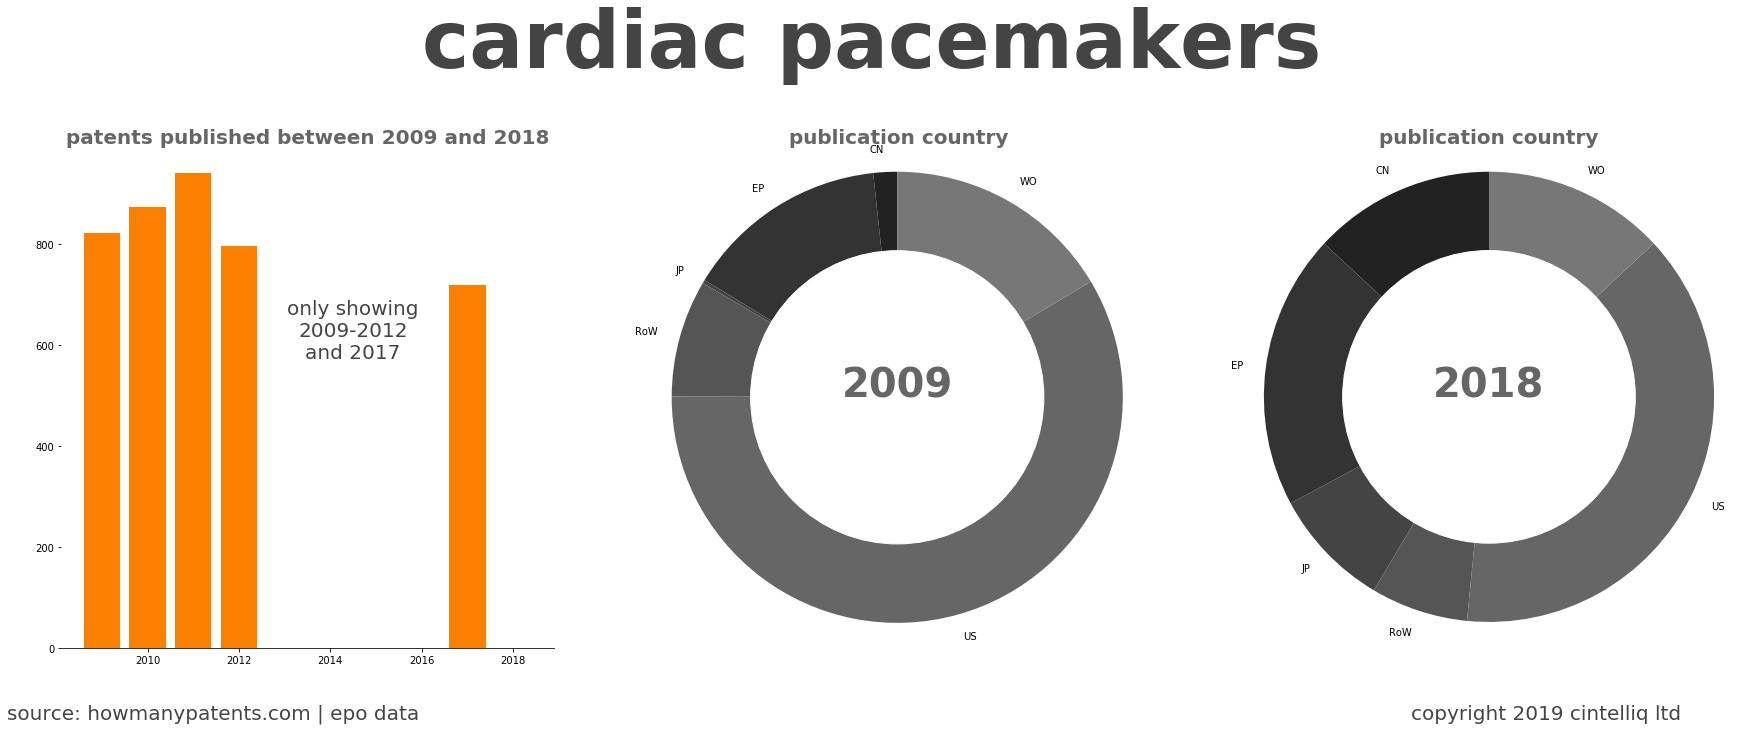 summary of patents for Cardiac Pacemakers